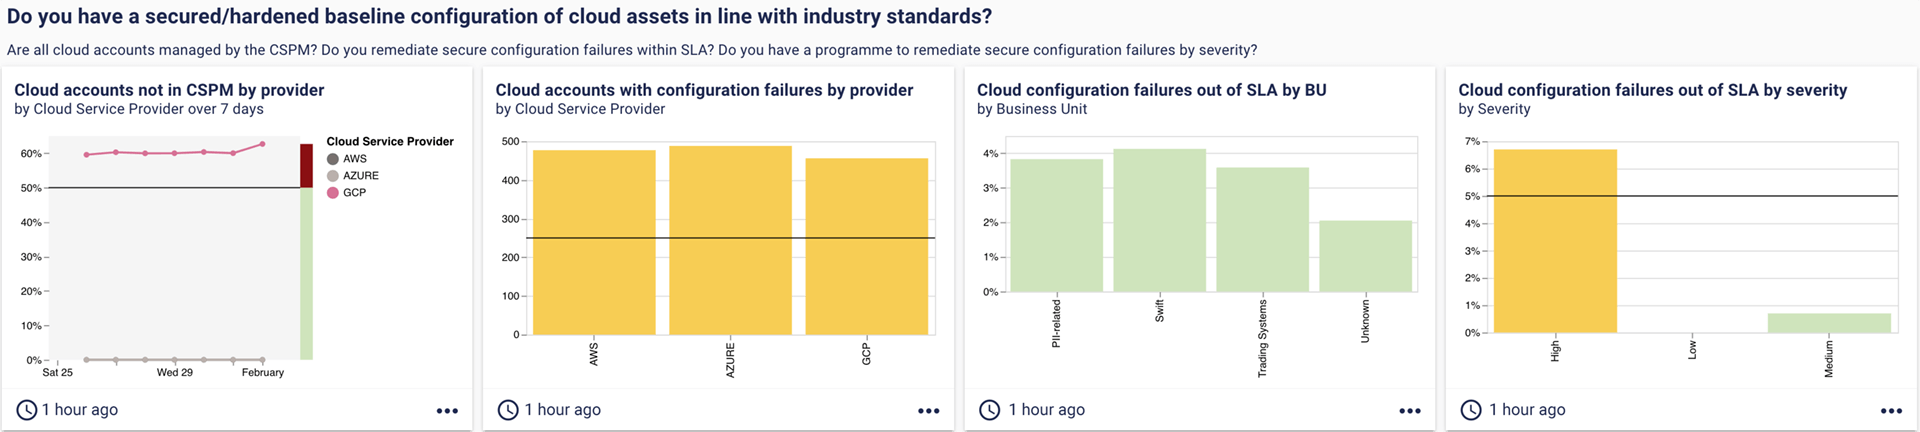 Dashboard: Do you have a secured hardened baseline configuration of cloud assets in line with industry standards